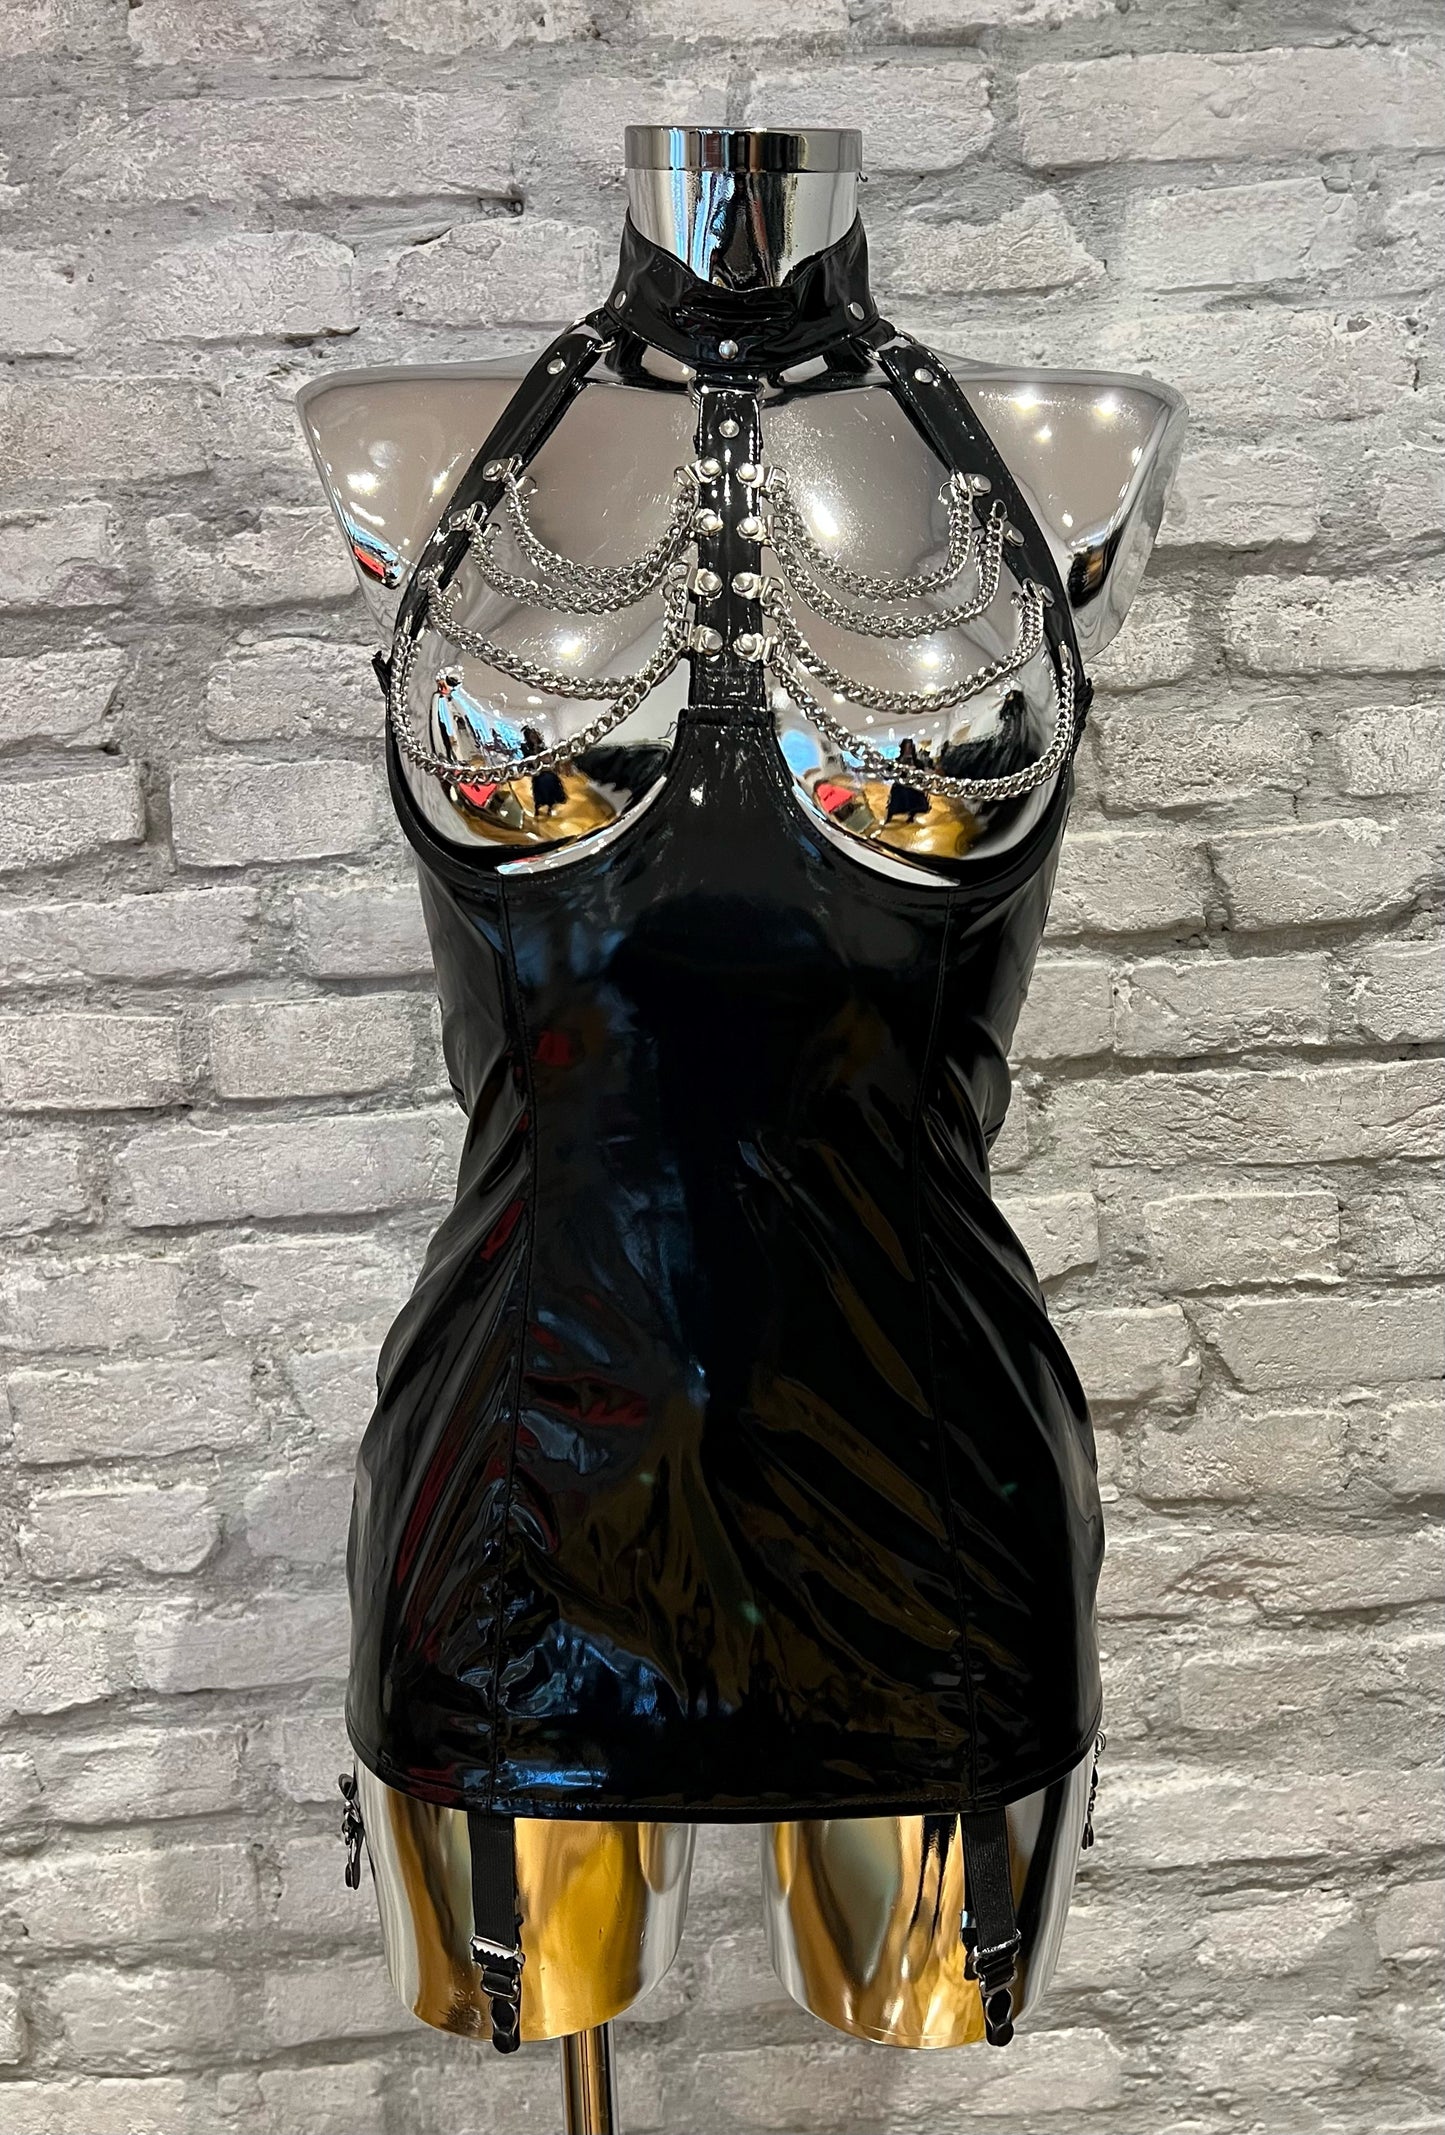 Vinyl corselet with chains